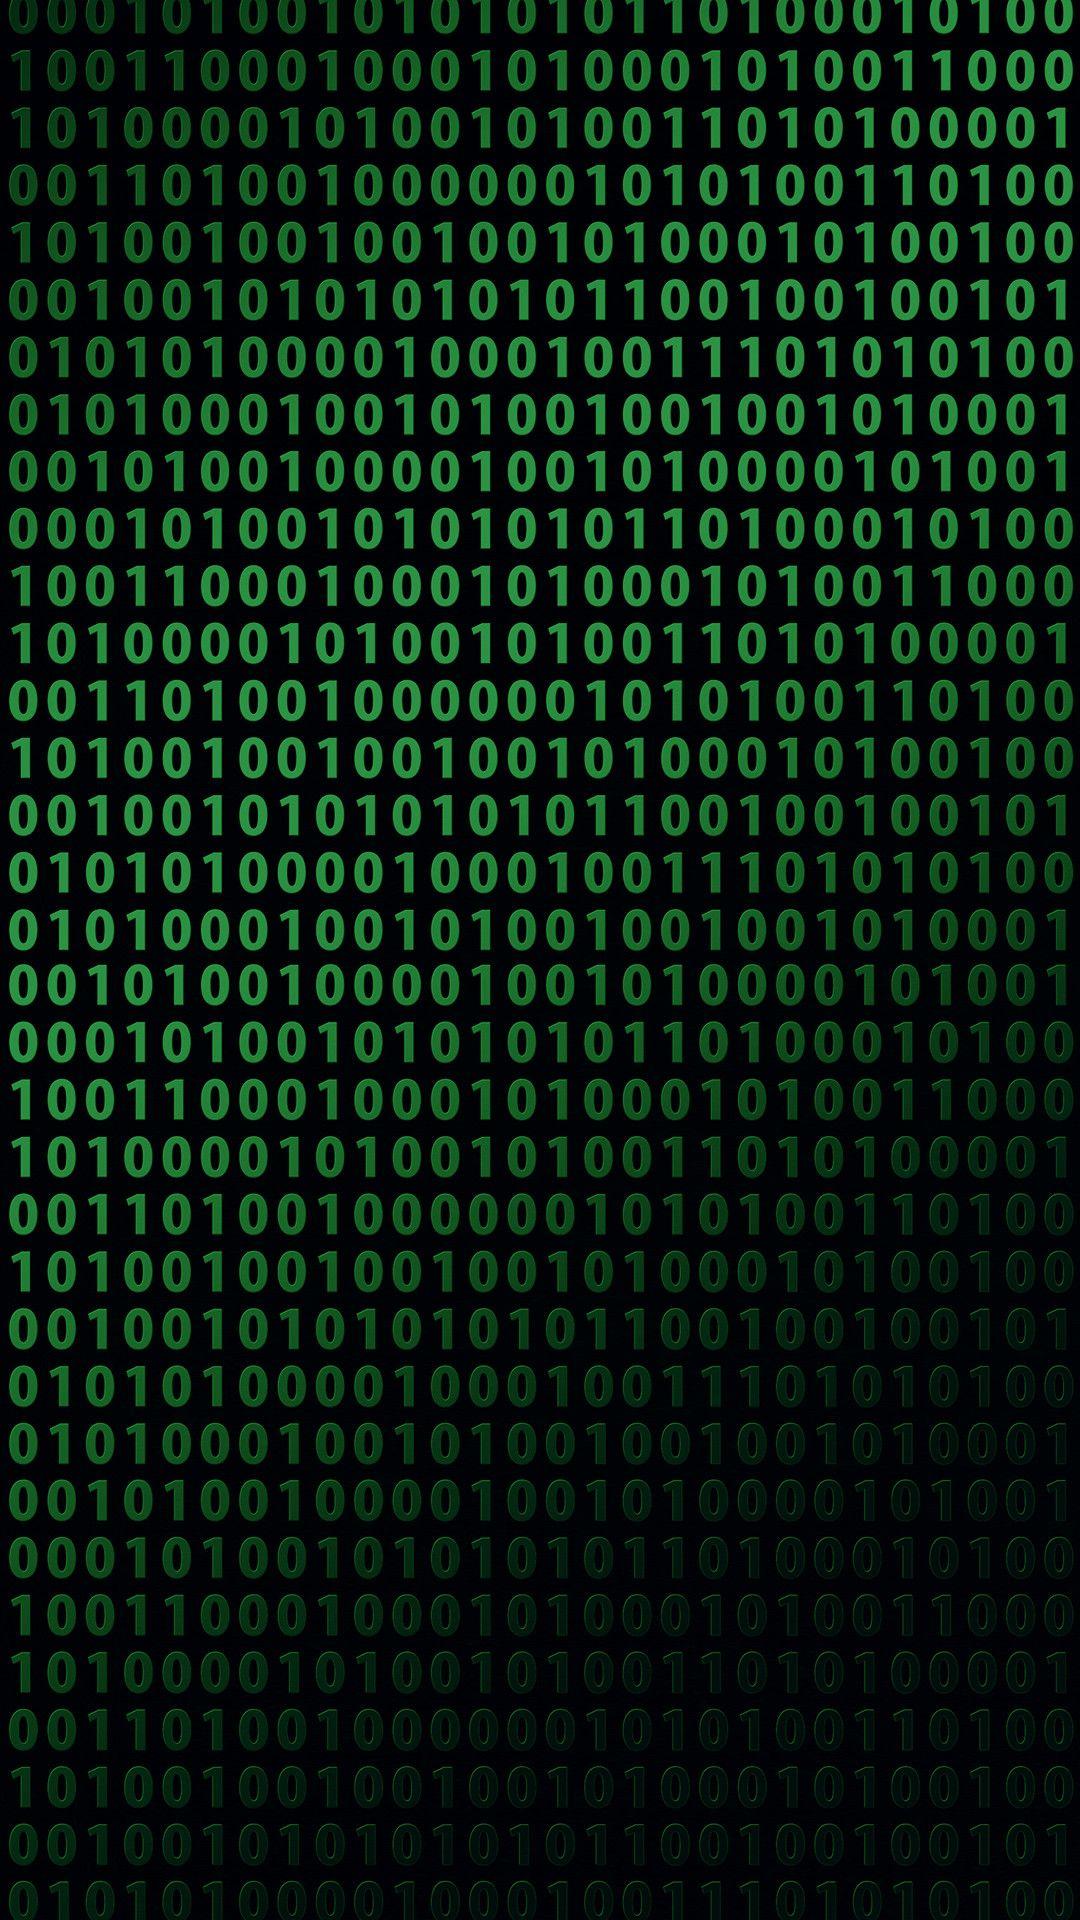 Binary Code Wallpaper background picture